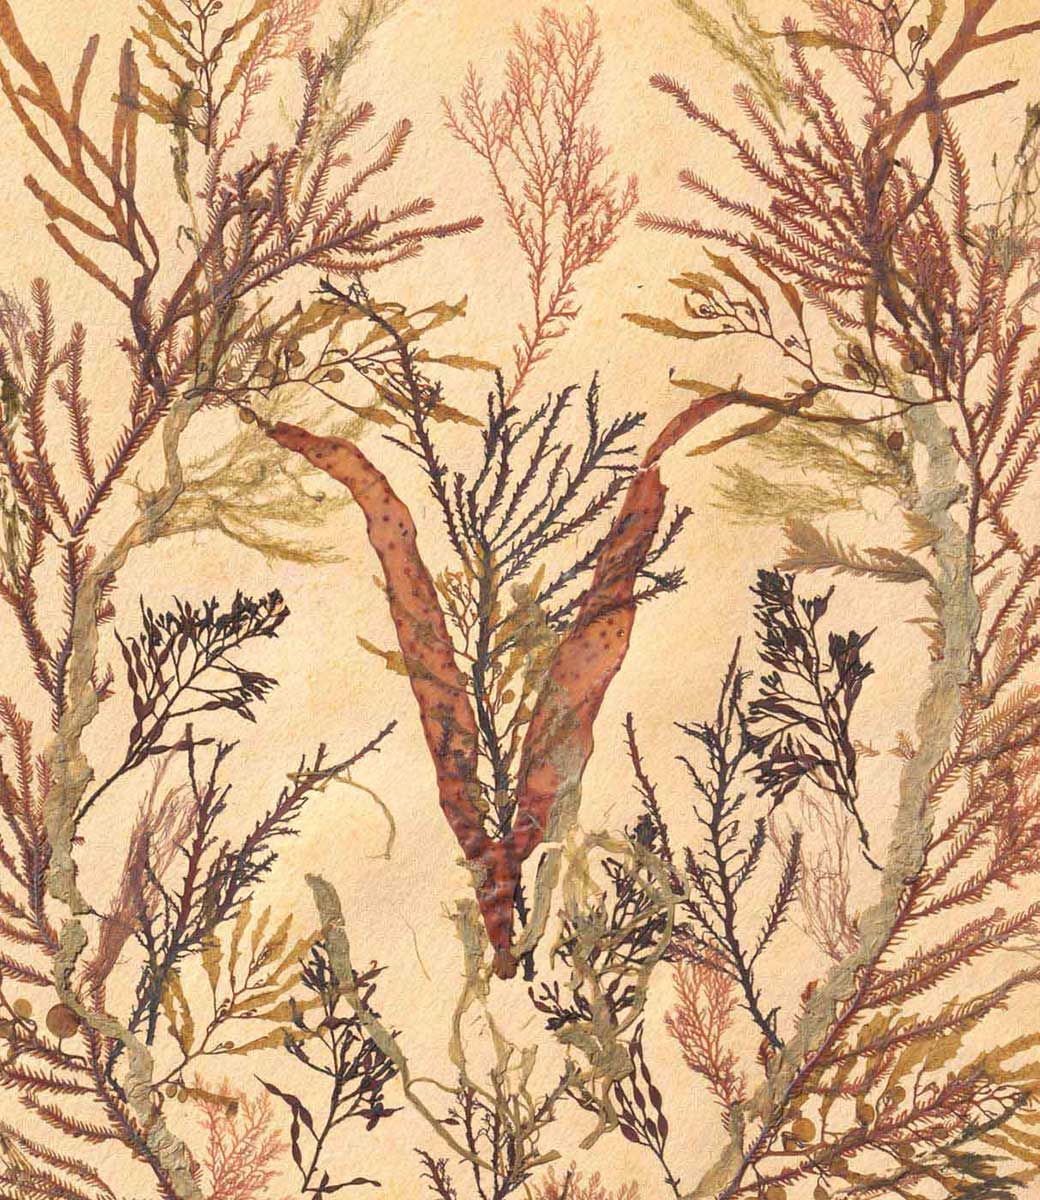 Detail of a page depicting seaweed specimens. - click to view larger image